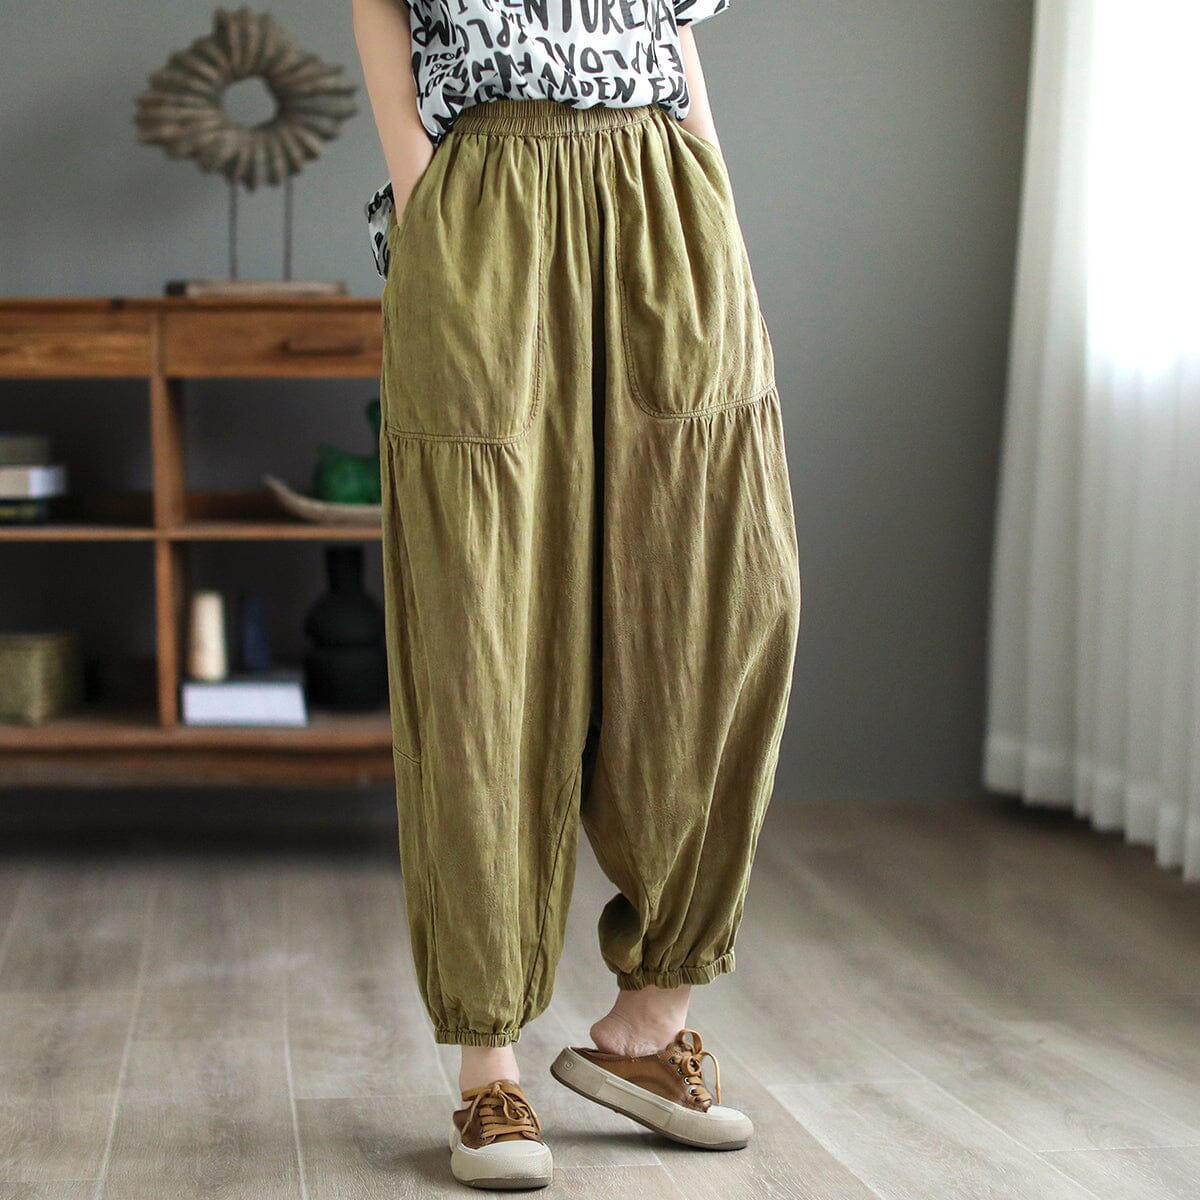 Spring Retro Pleated Cotton Linen Trousers Plus Size Mar 2023 New Arrival One Size Light Green 